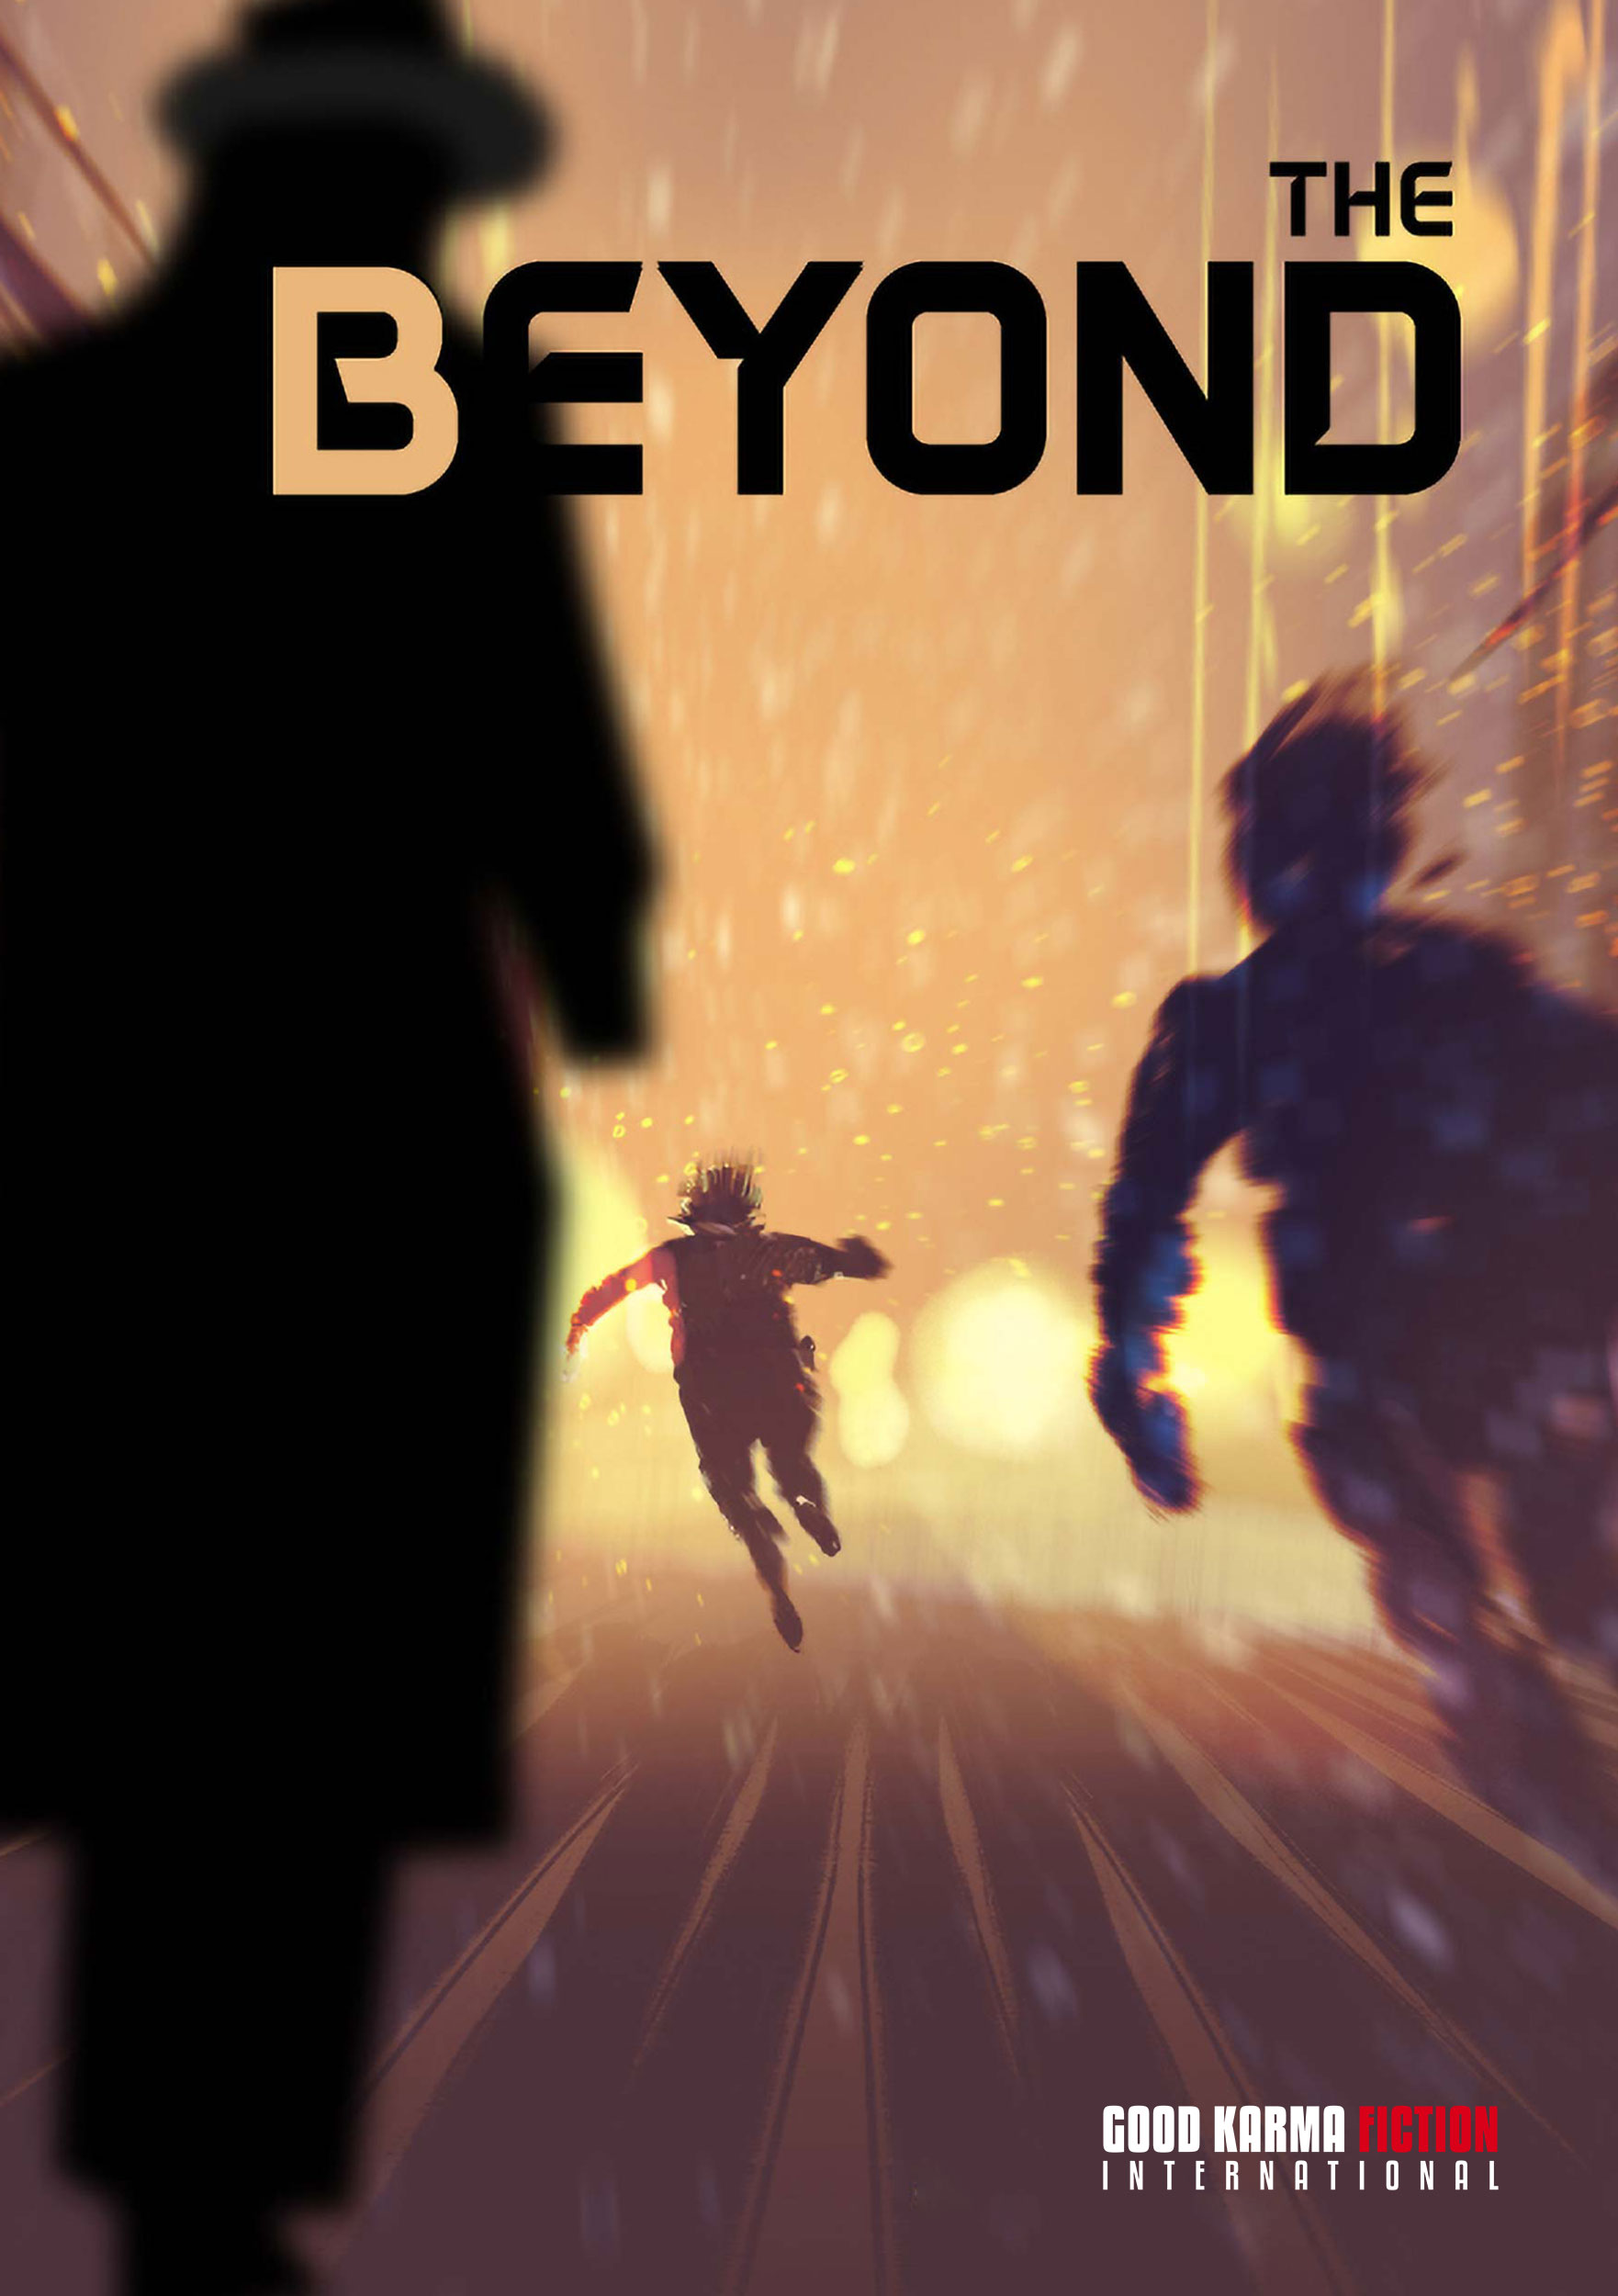 <i  id="iconinf1" class="fas fa-info" aria-hidden="true"></i><br> <h3>THE BEYOND</h3><br><p> What, if a ghost claims to be your father?<br><br><b>-Mystic Thriller, Mini Series-<BR> In Development</b></p>